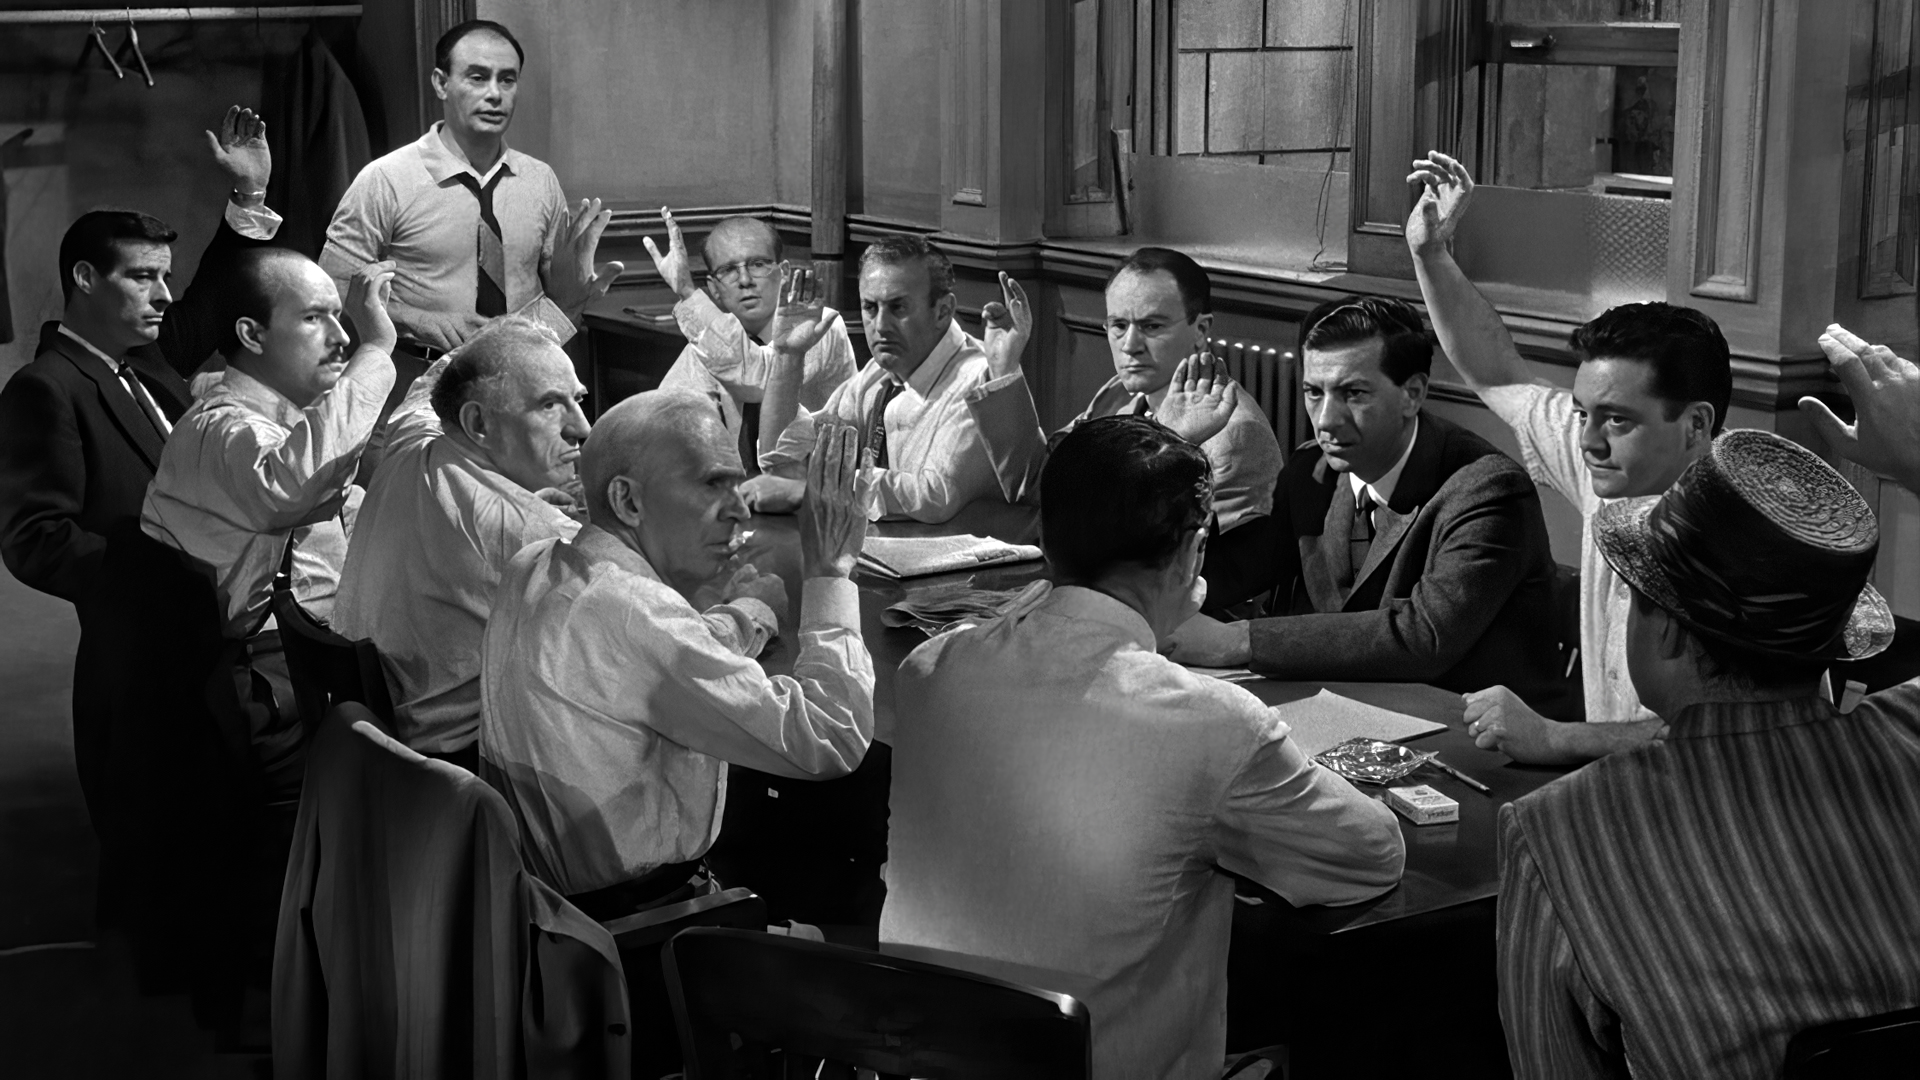 People 1920x1080 12 Angry Men movies film stills men table monochrome actor